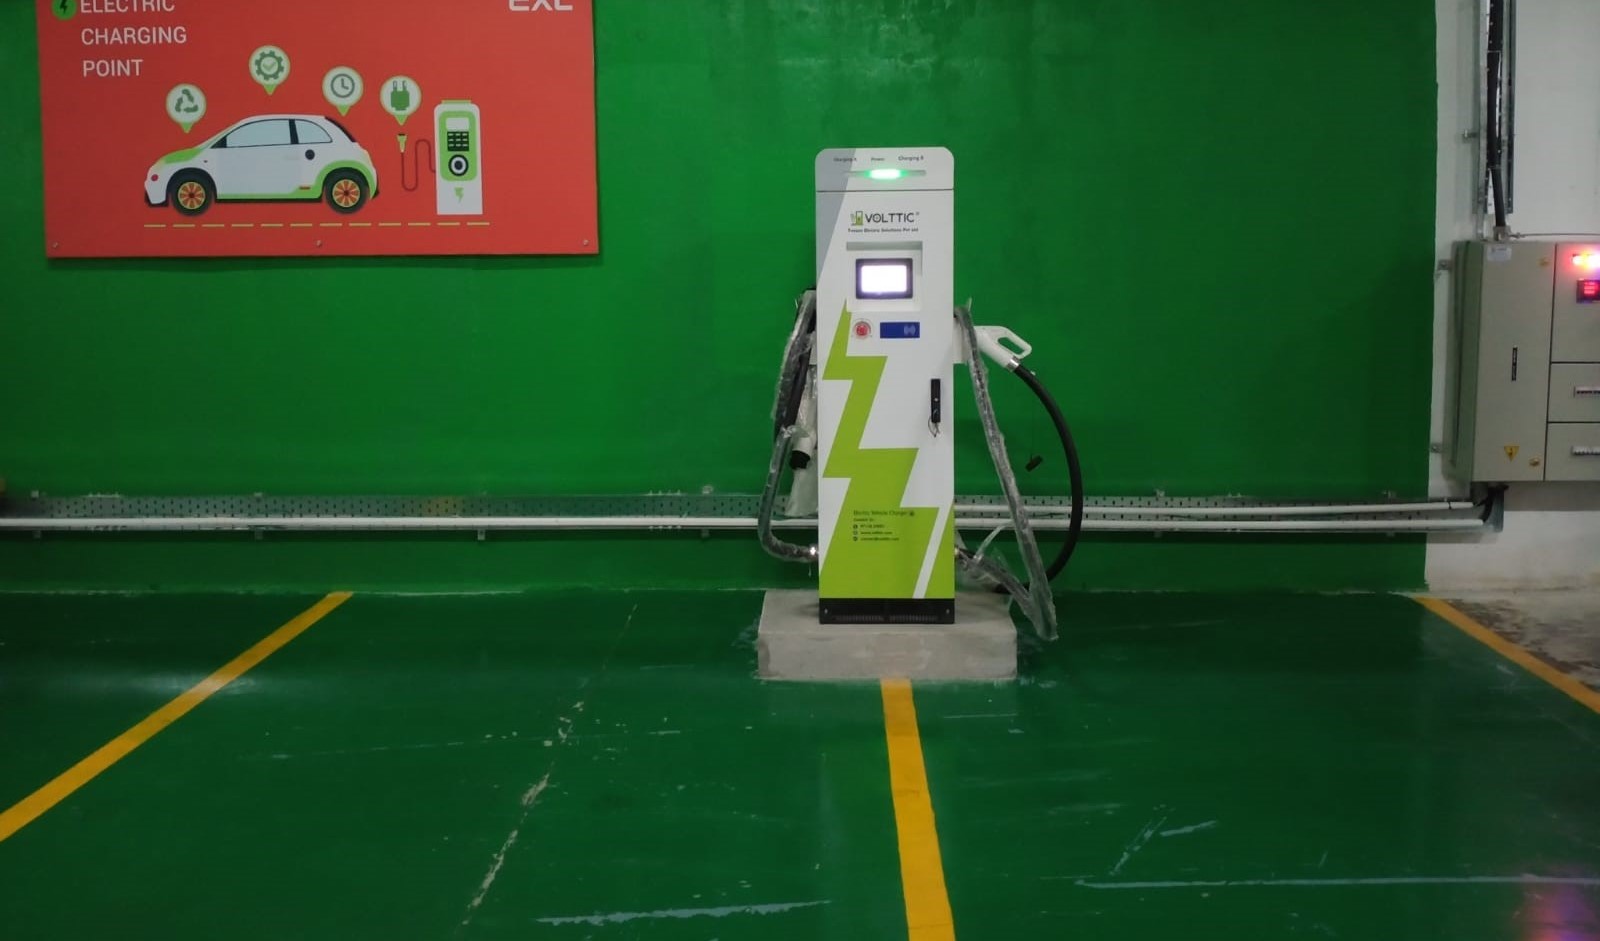 Volttic installed EV Charging stations for corporate client at Noida